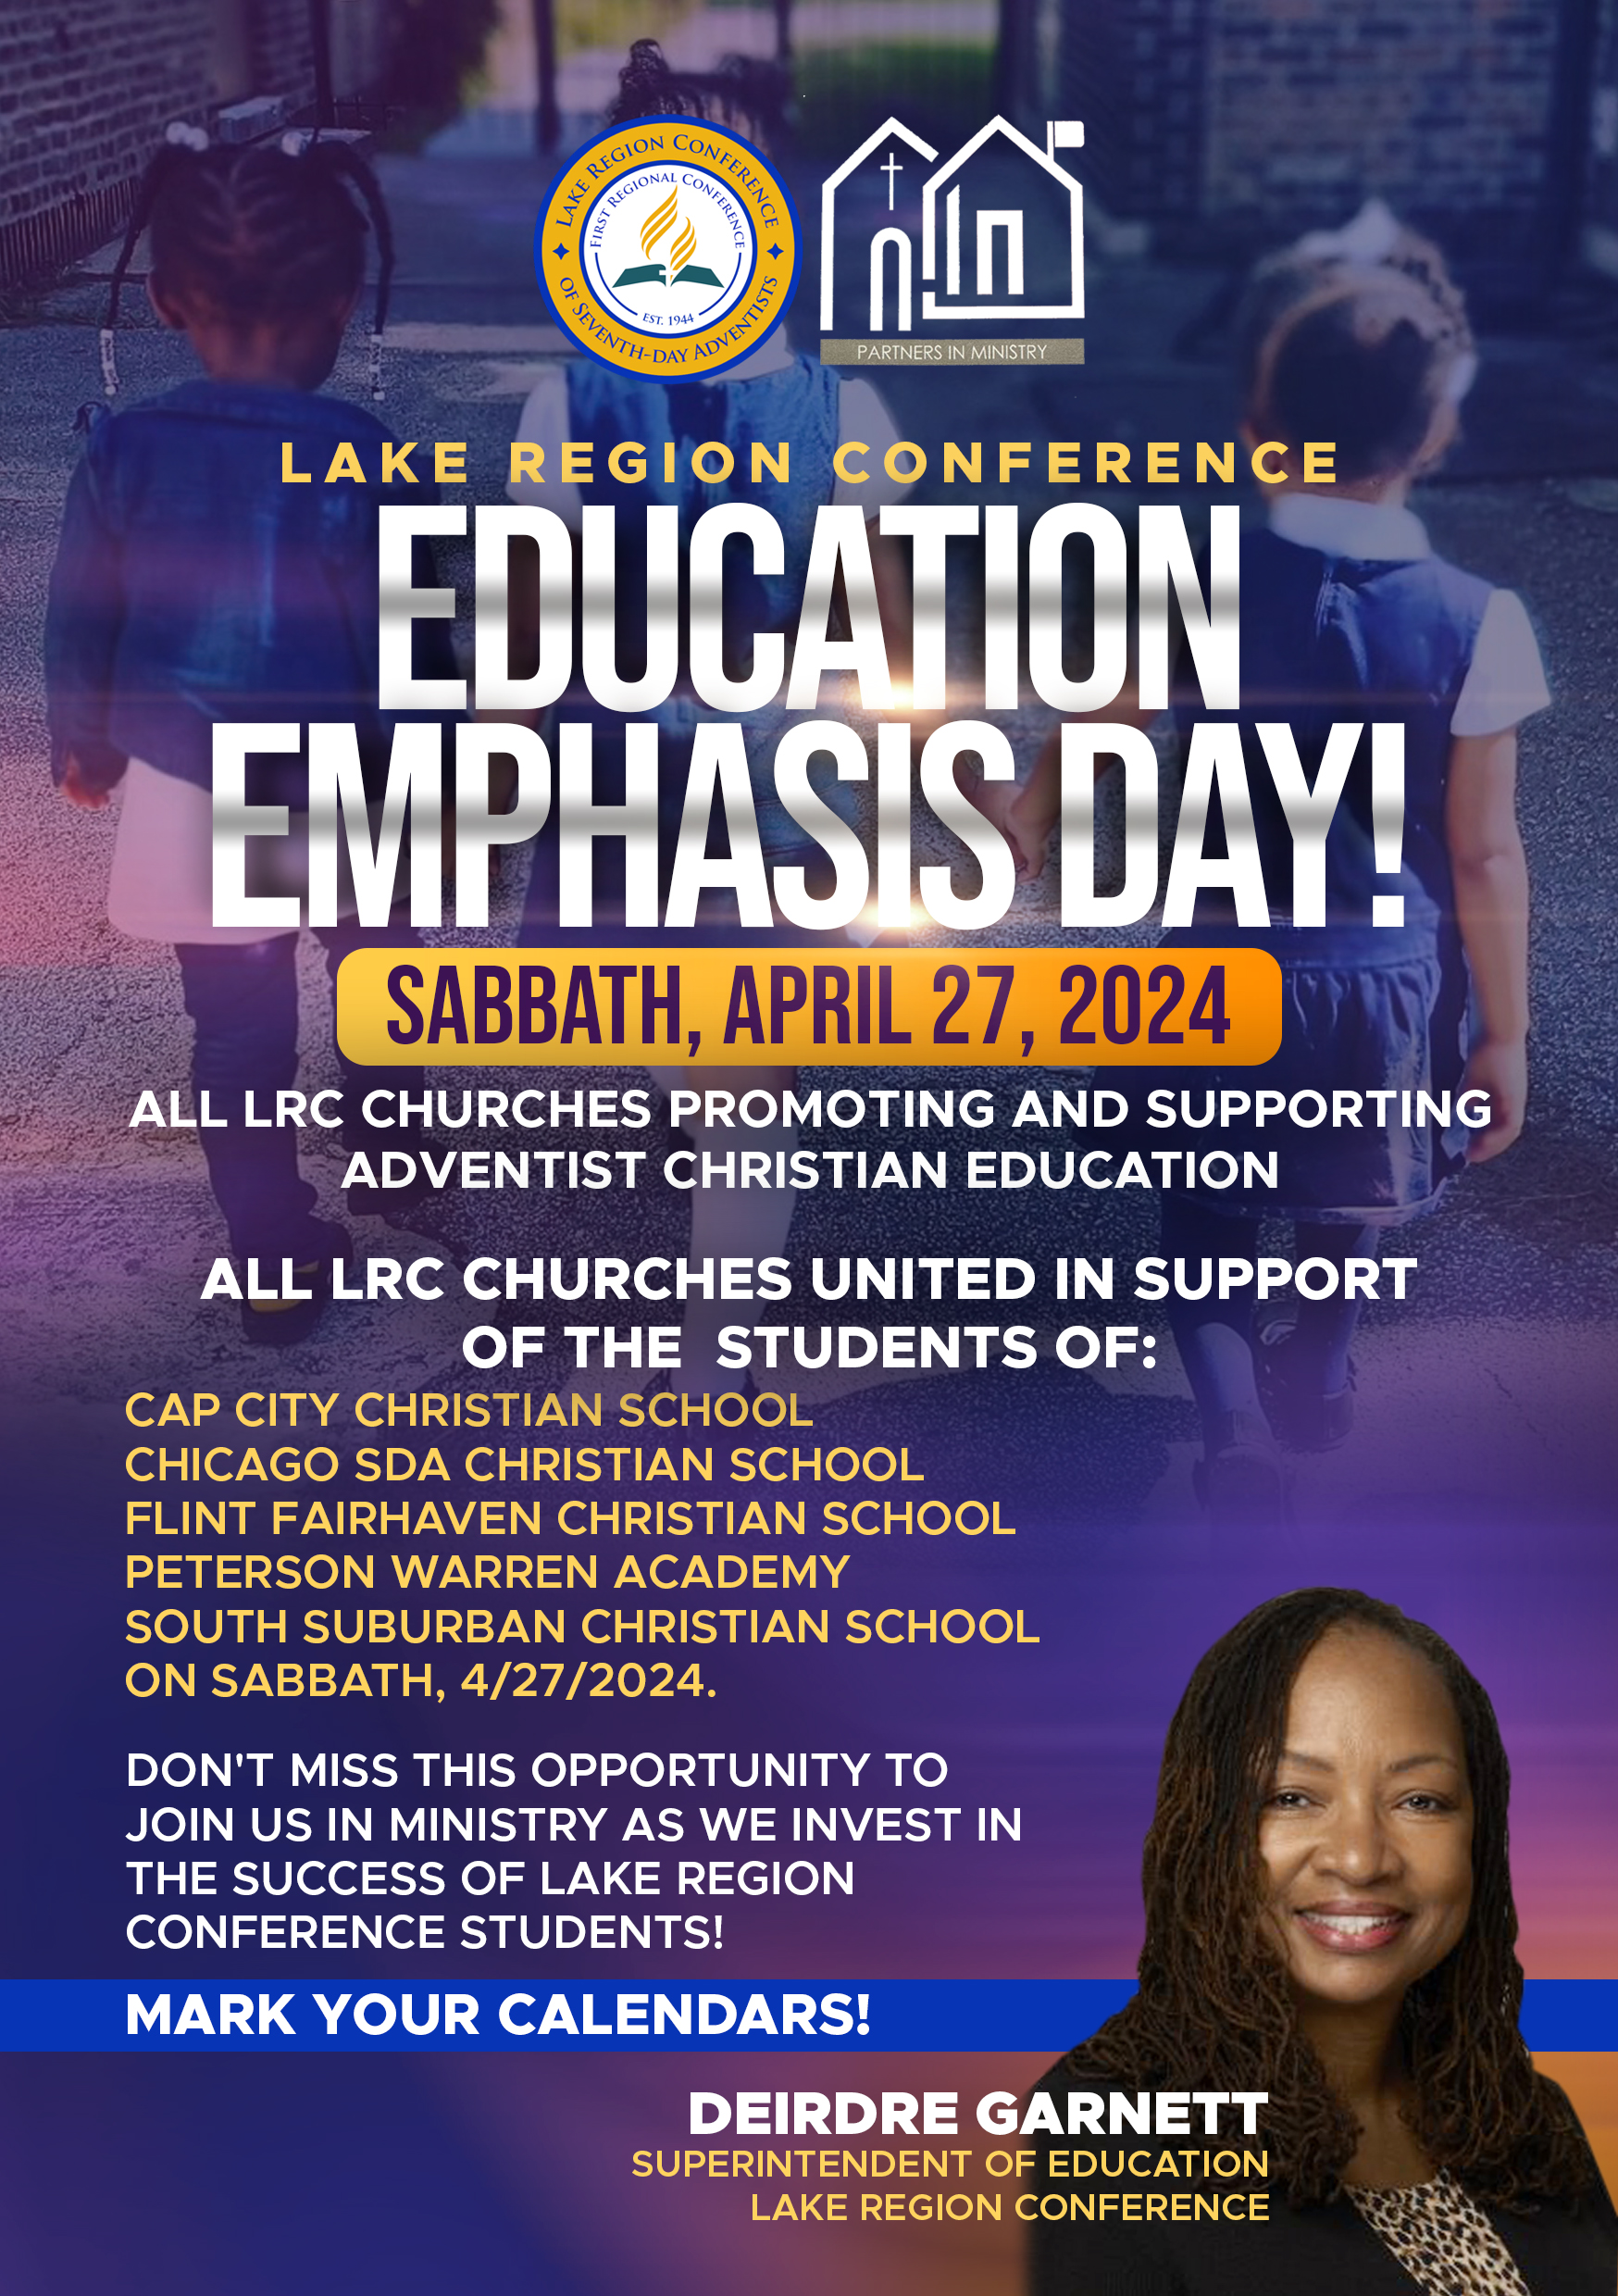 Lake Region Conference Education Emphasis Day!